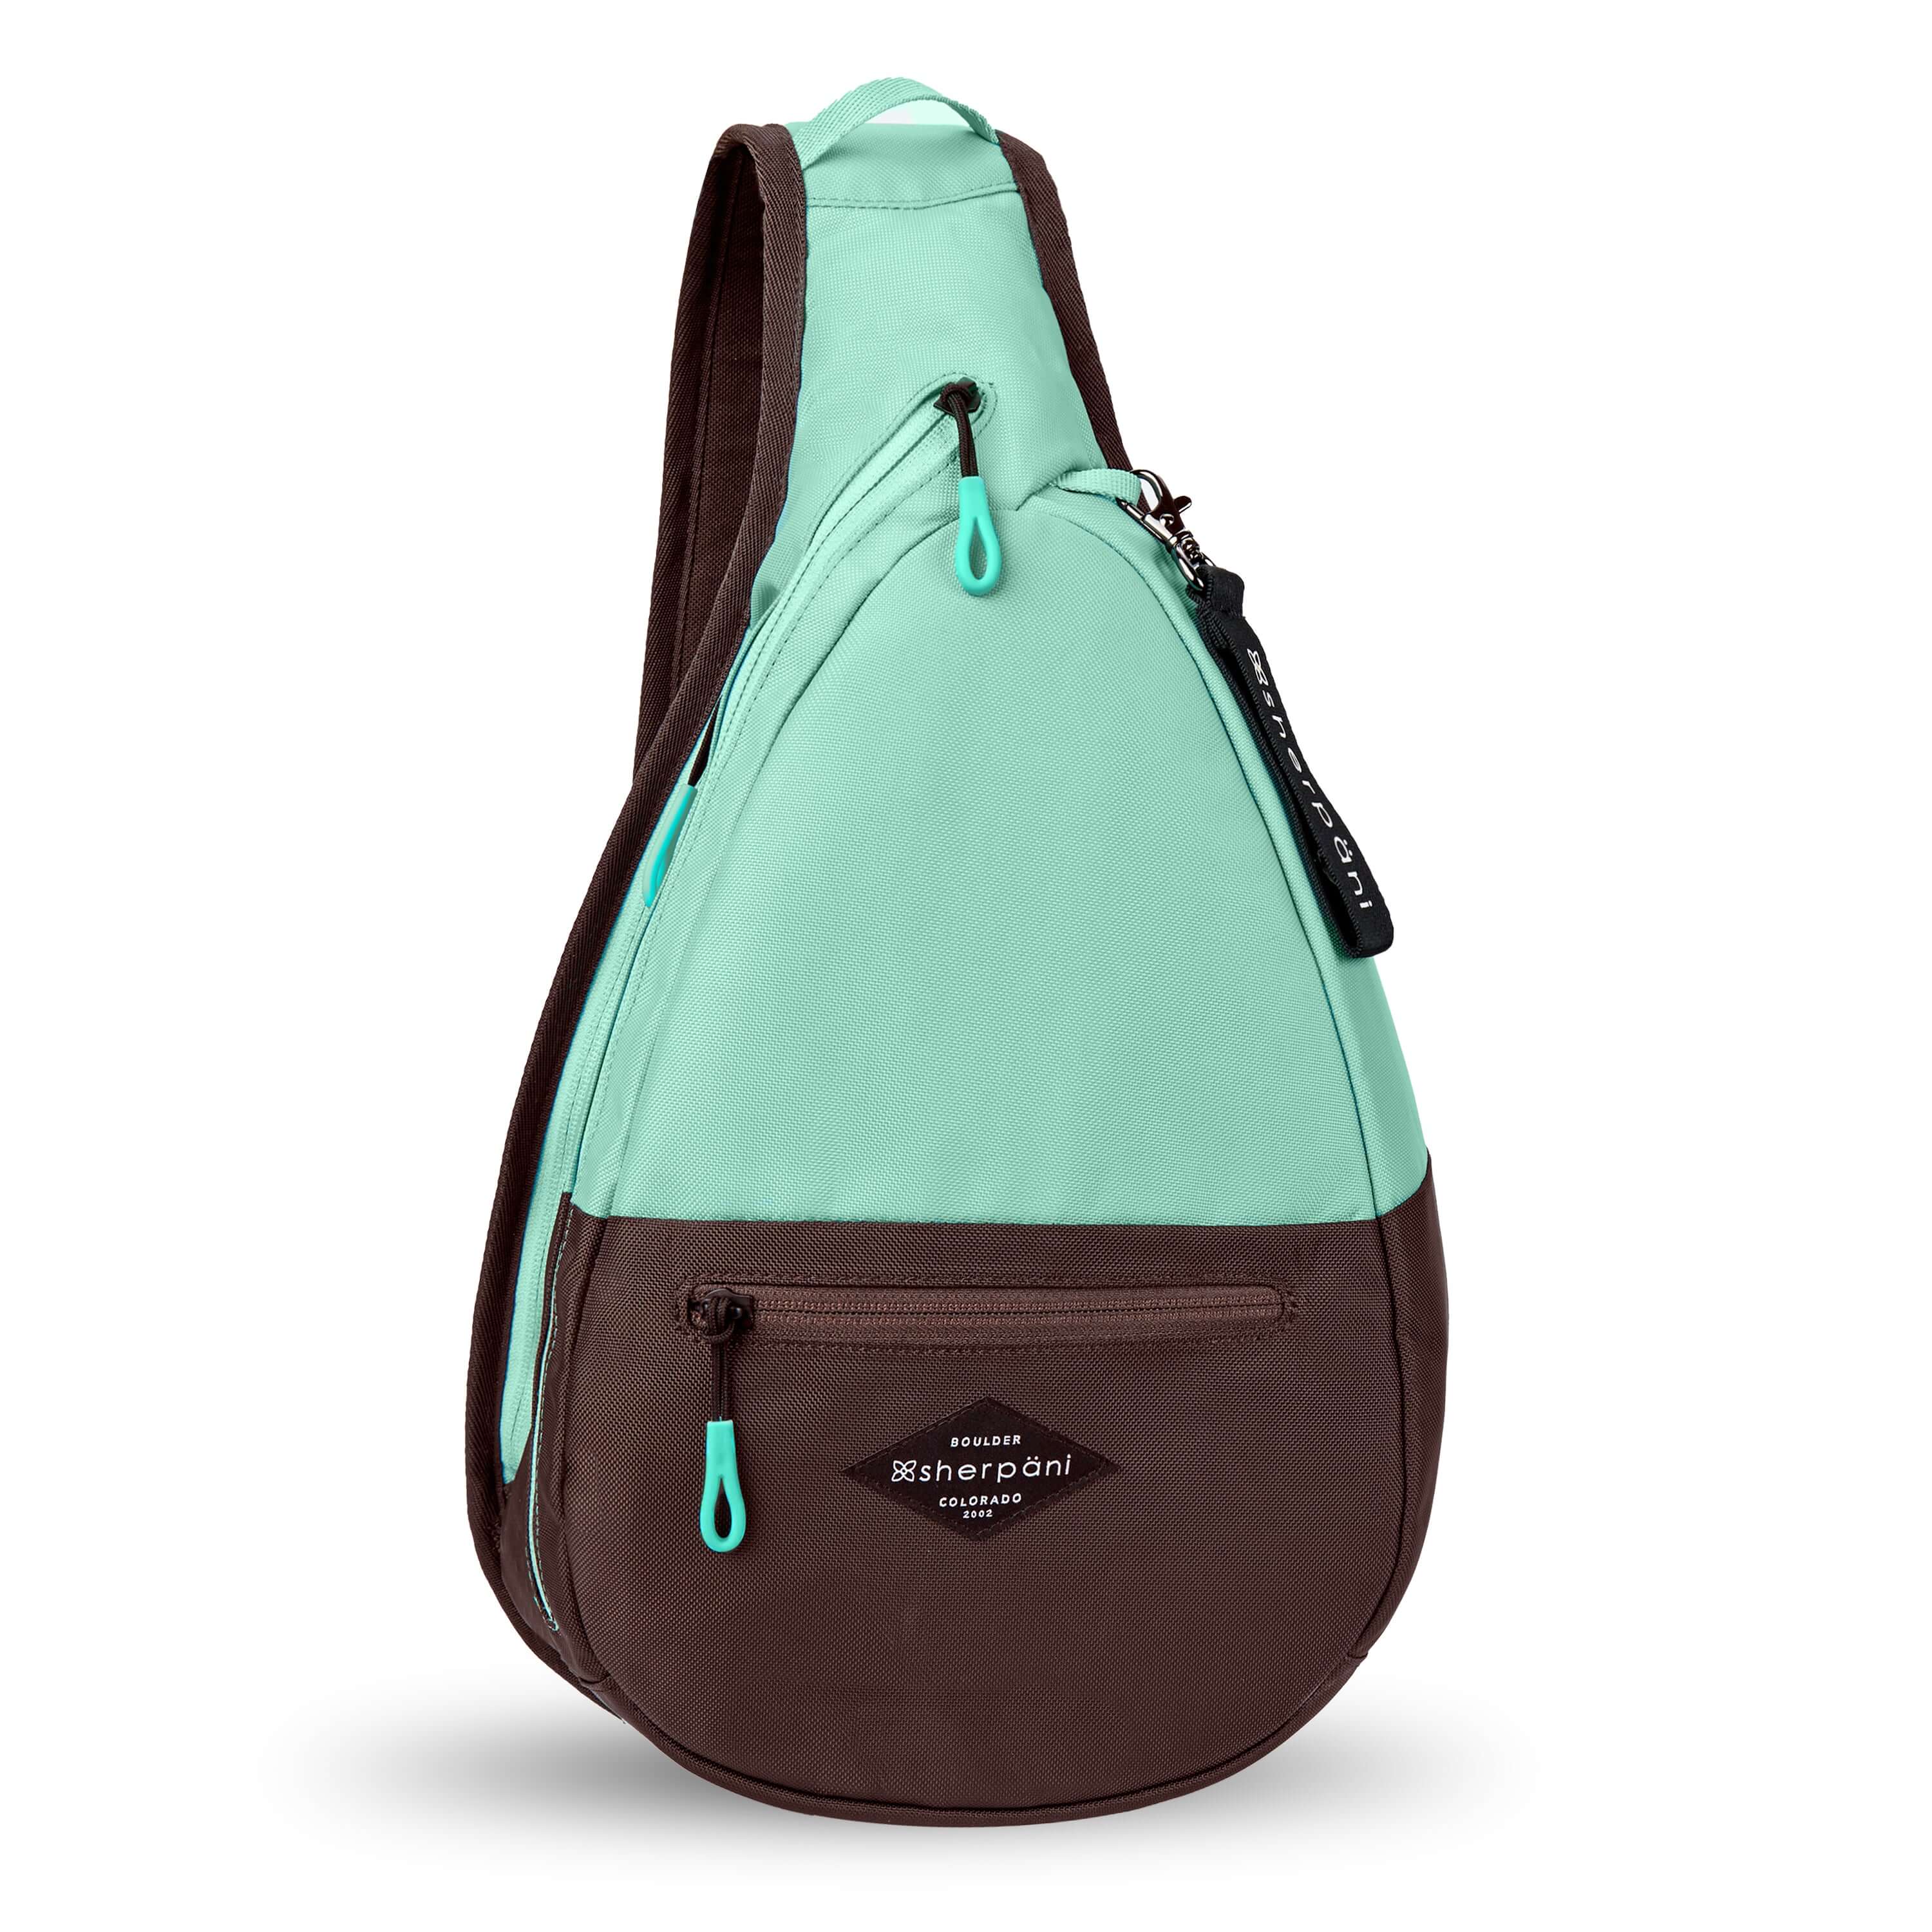 Flat front view of Sherpani's bag, the Esprit in Seagreen. The teardrop shaped bag is two-toned in light green and brown. There is a small zipper pocket on the front of the bag, the main zipper compartment in the middle, and another zipper pocket towards the back of the bag. It has easy-pull zippers accented in light green. A branded Sherpani keychain is clipped to a fabric loop near the top of the bag. 